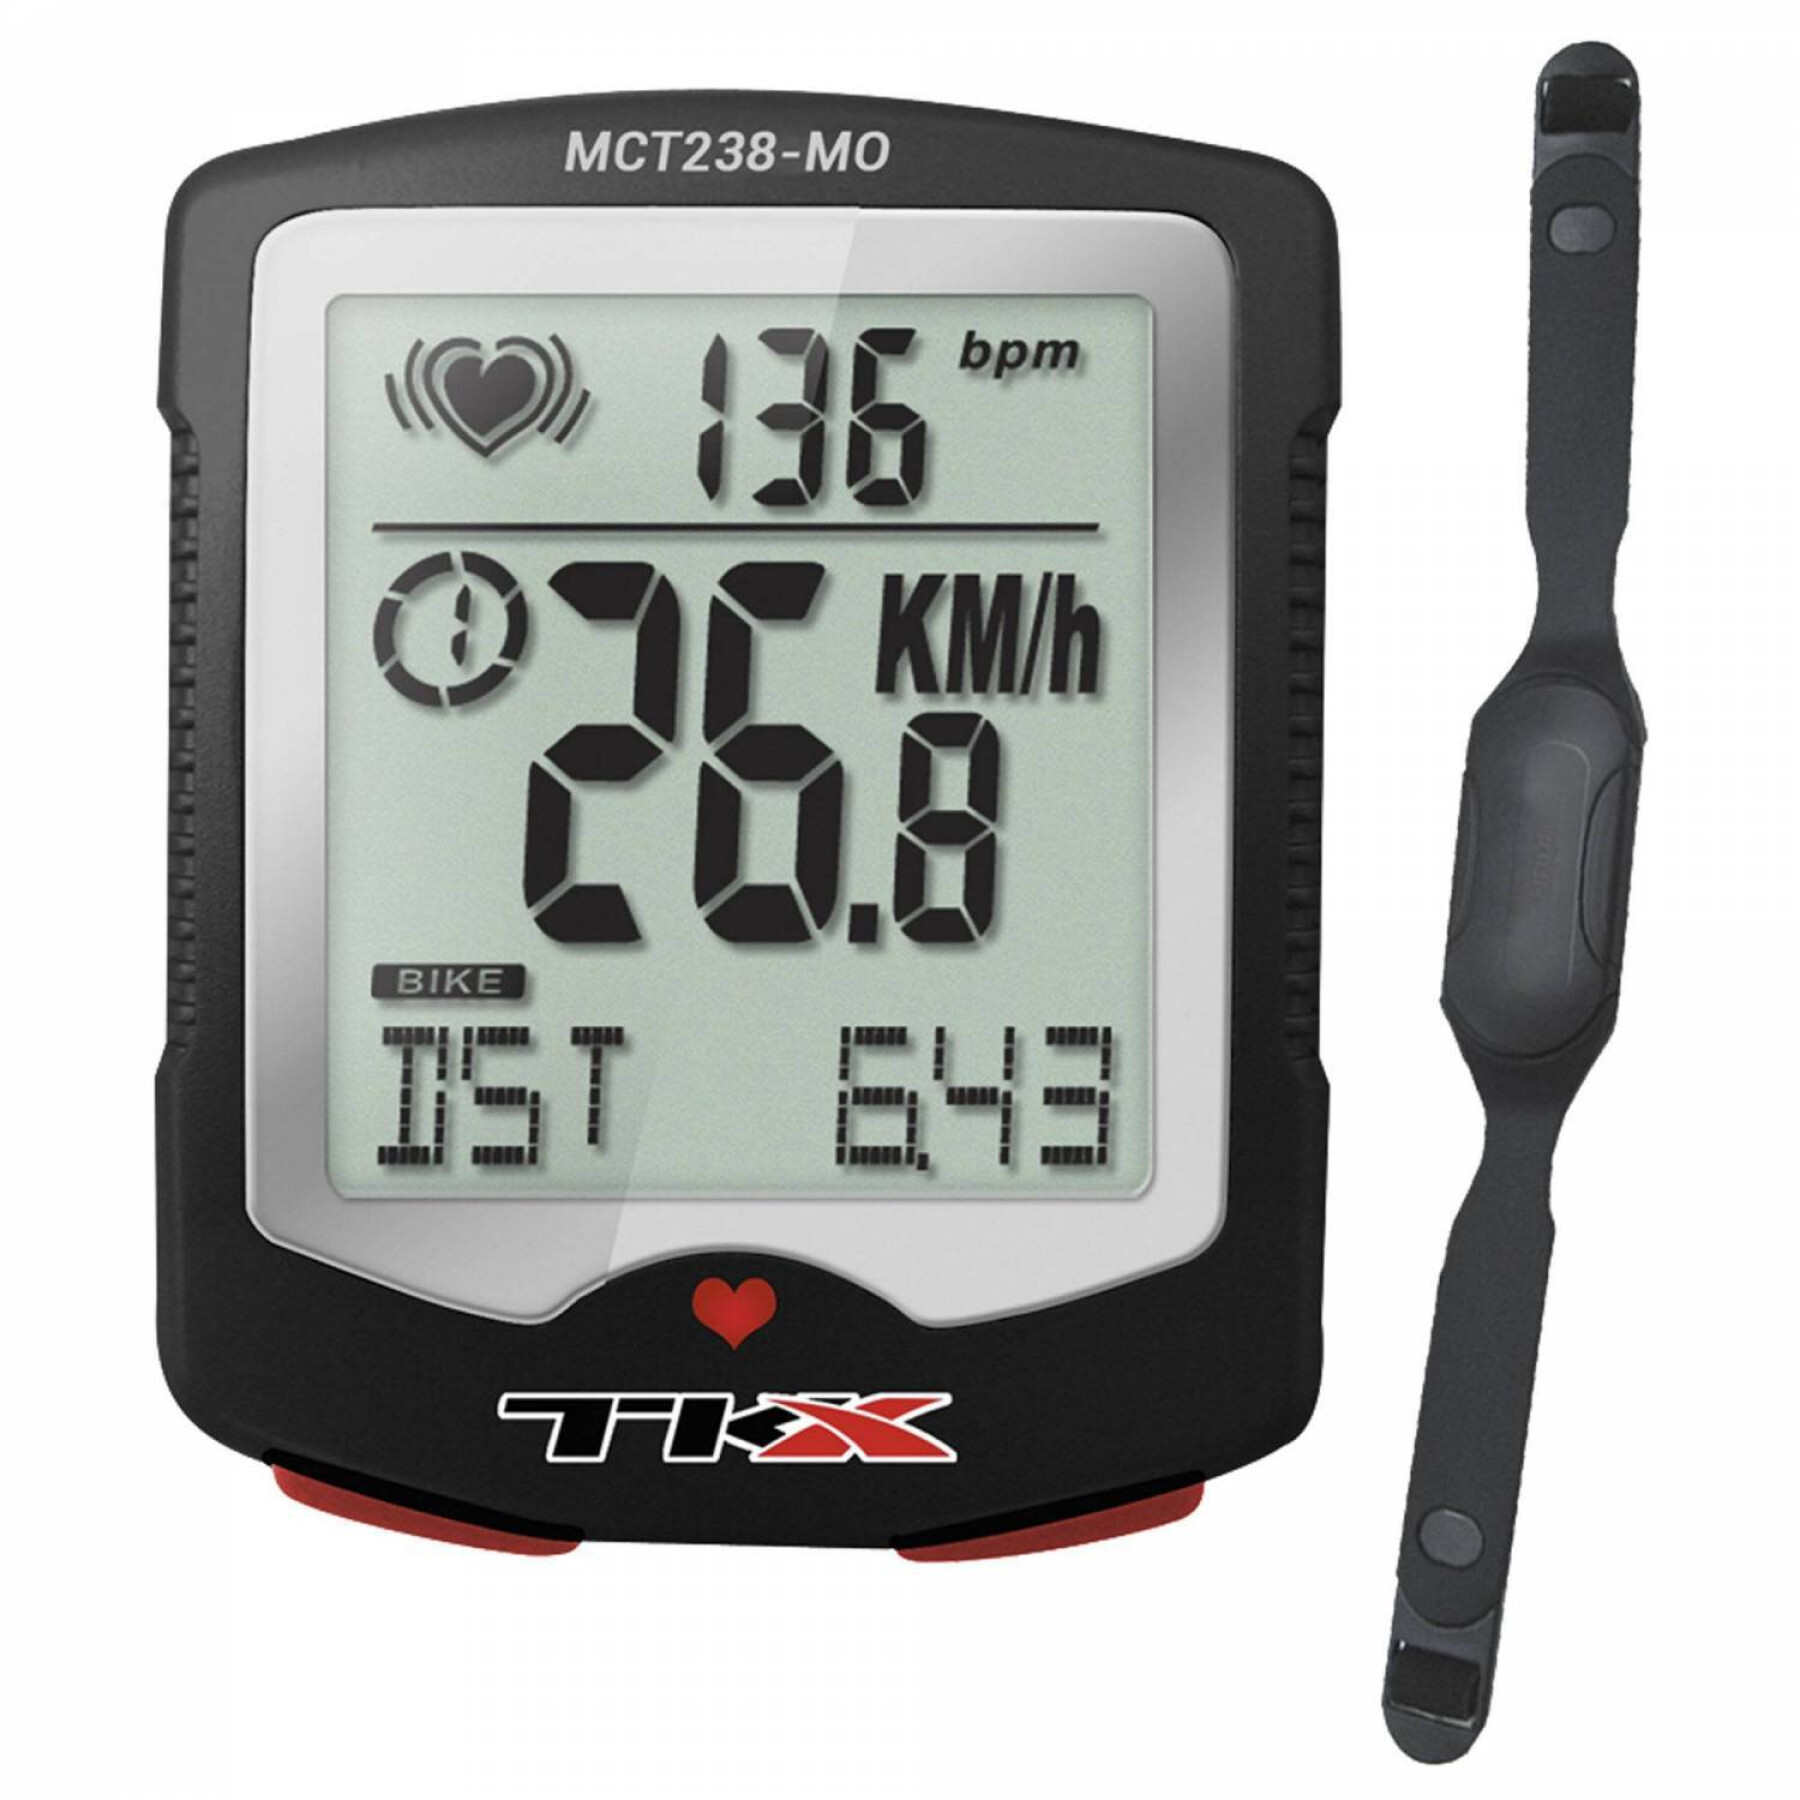 22-function cable-free cycle computer with heart rate monitor TKX